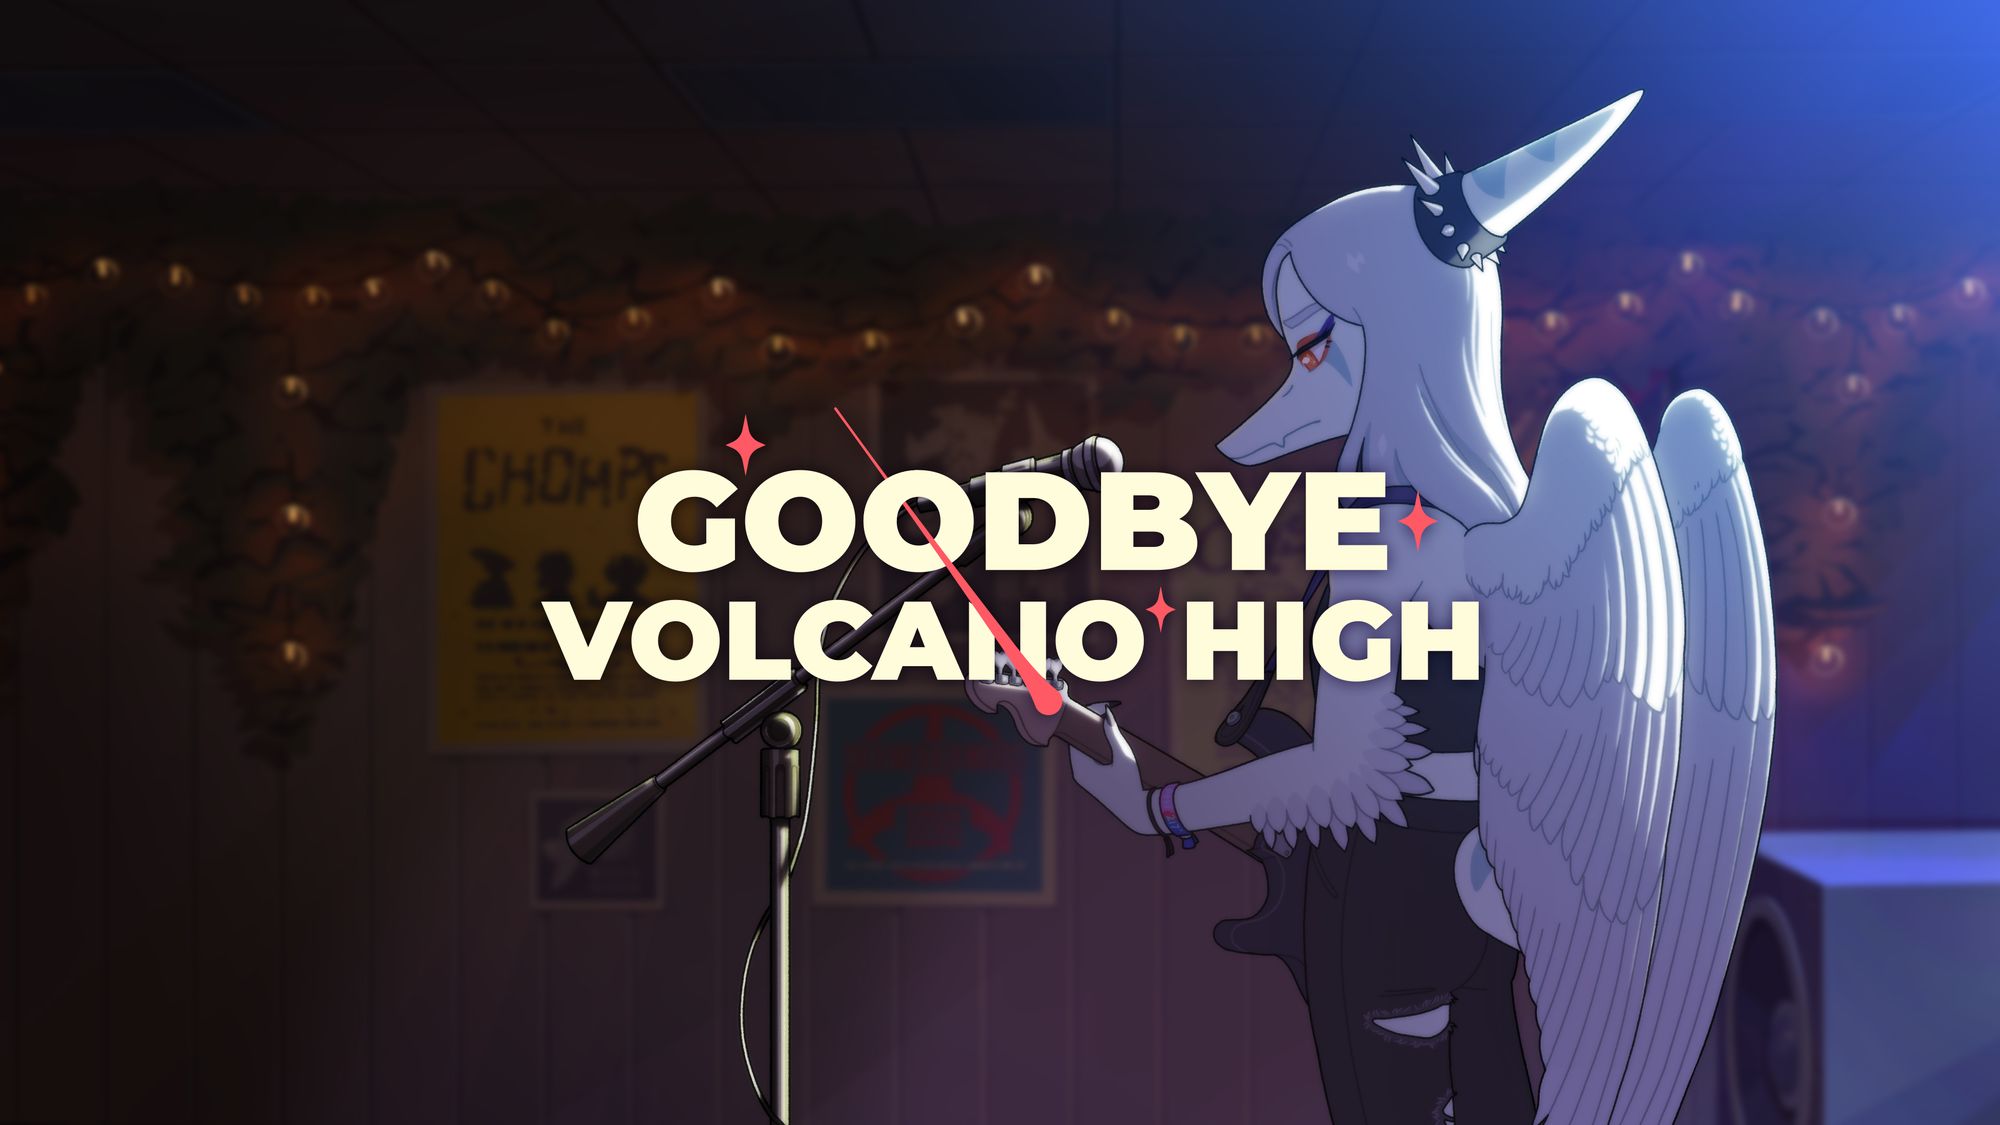 A promotional image for Goodbye Volcano High